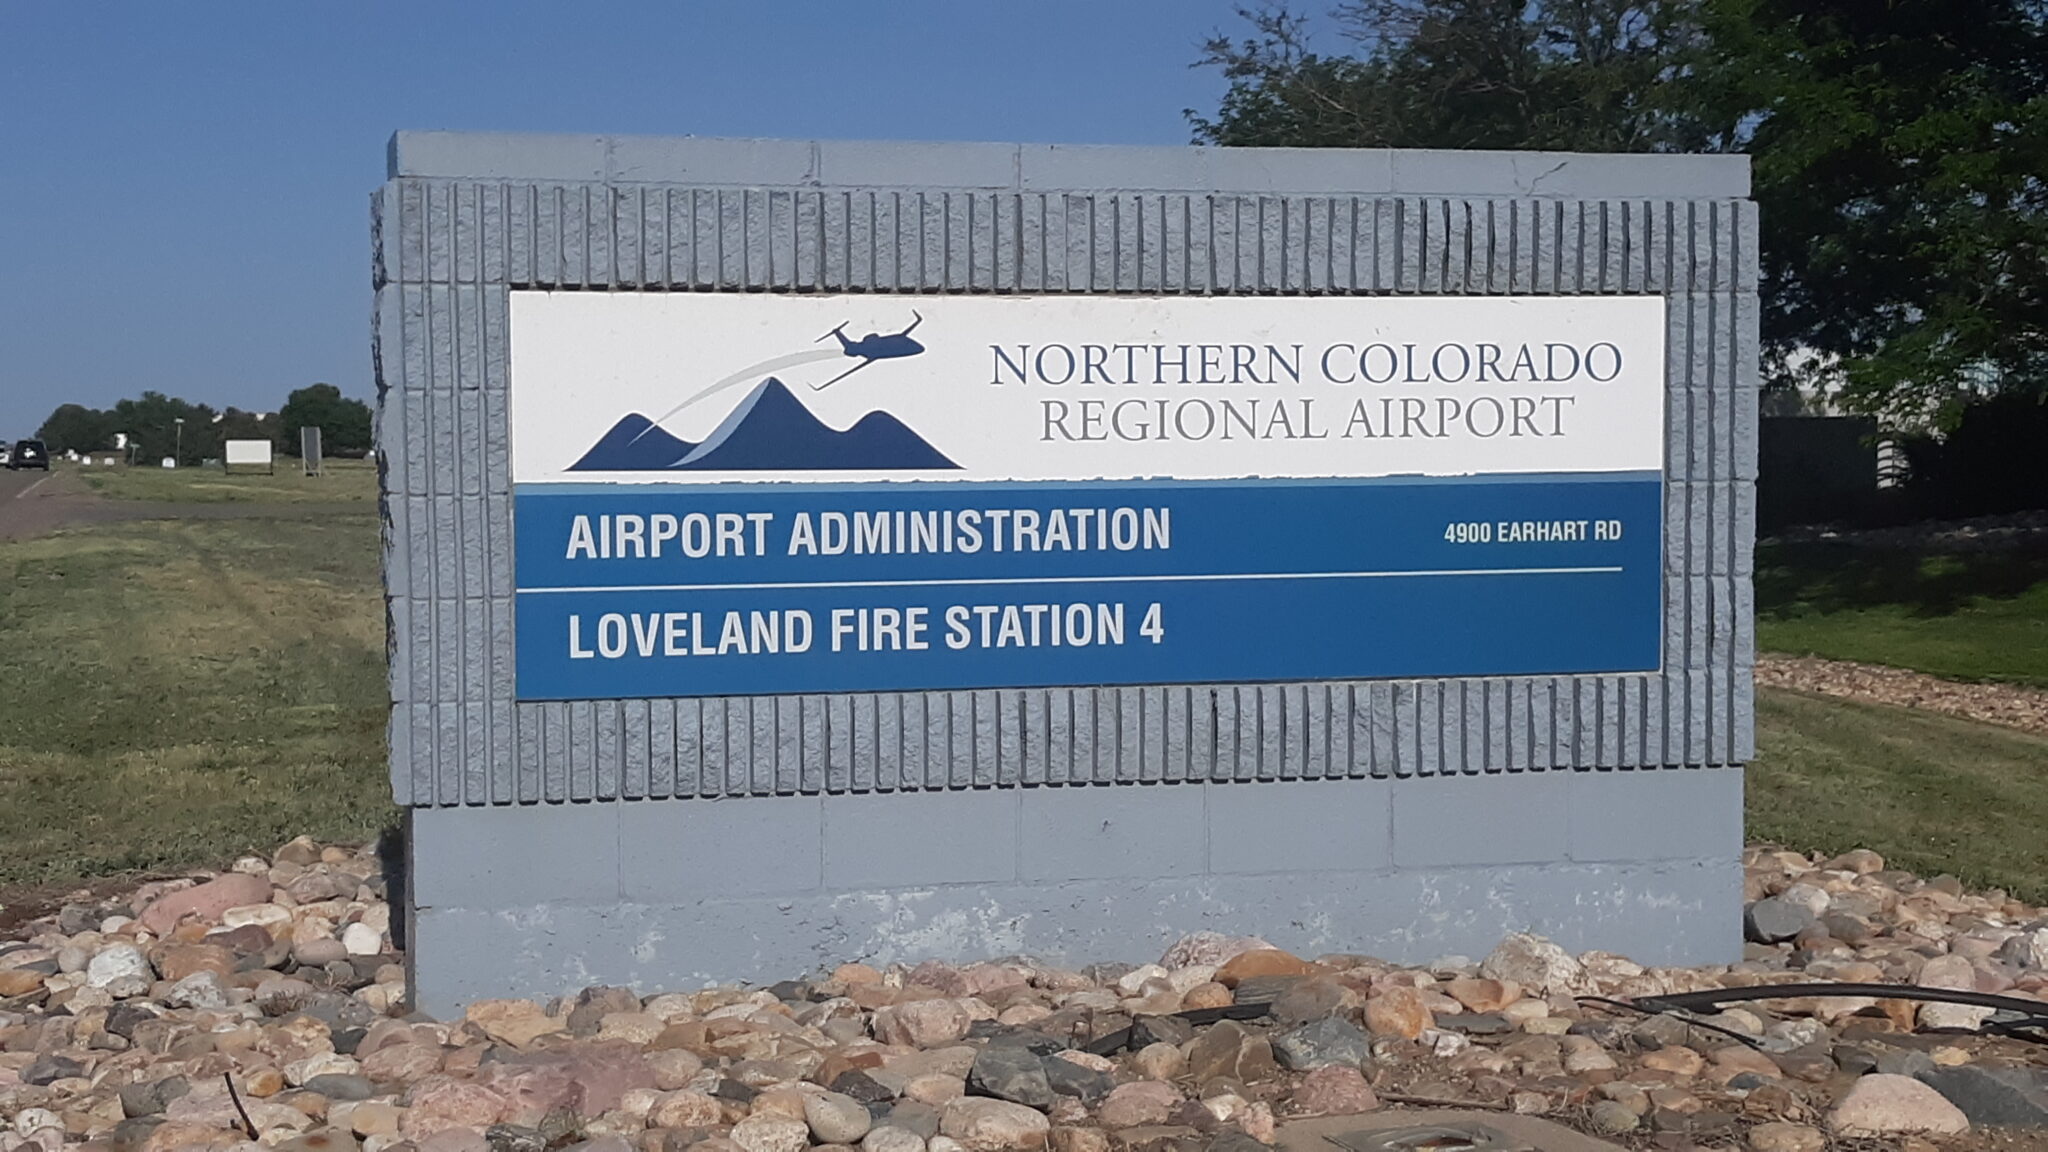 The Northern Colorado Regional Airport sign